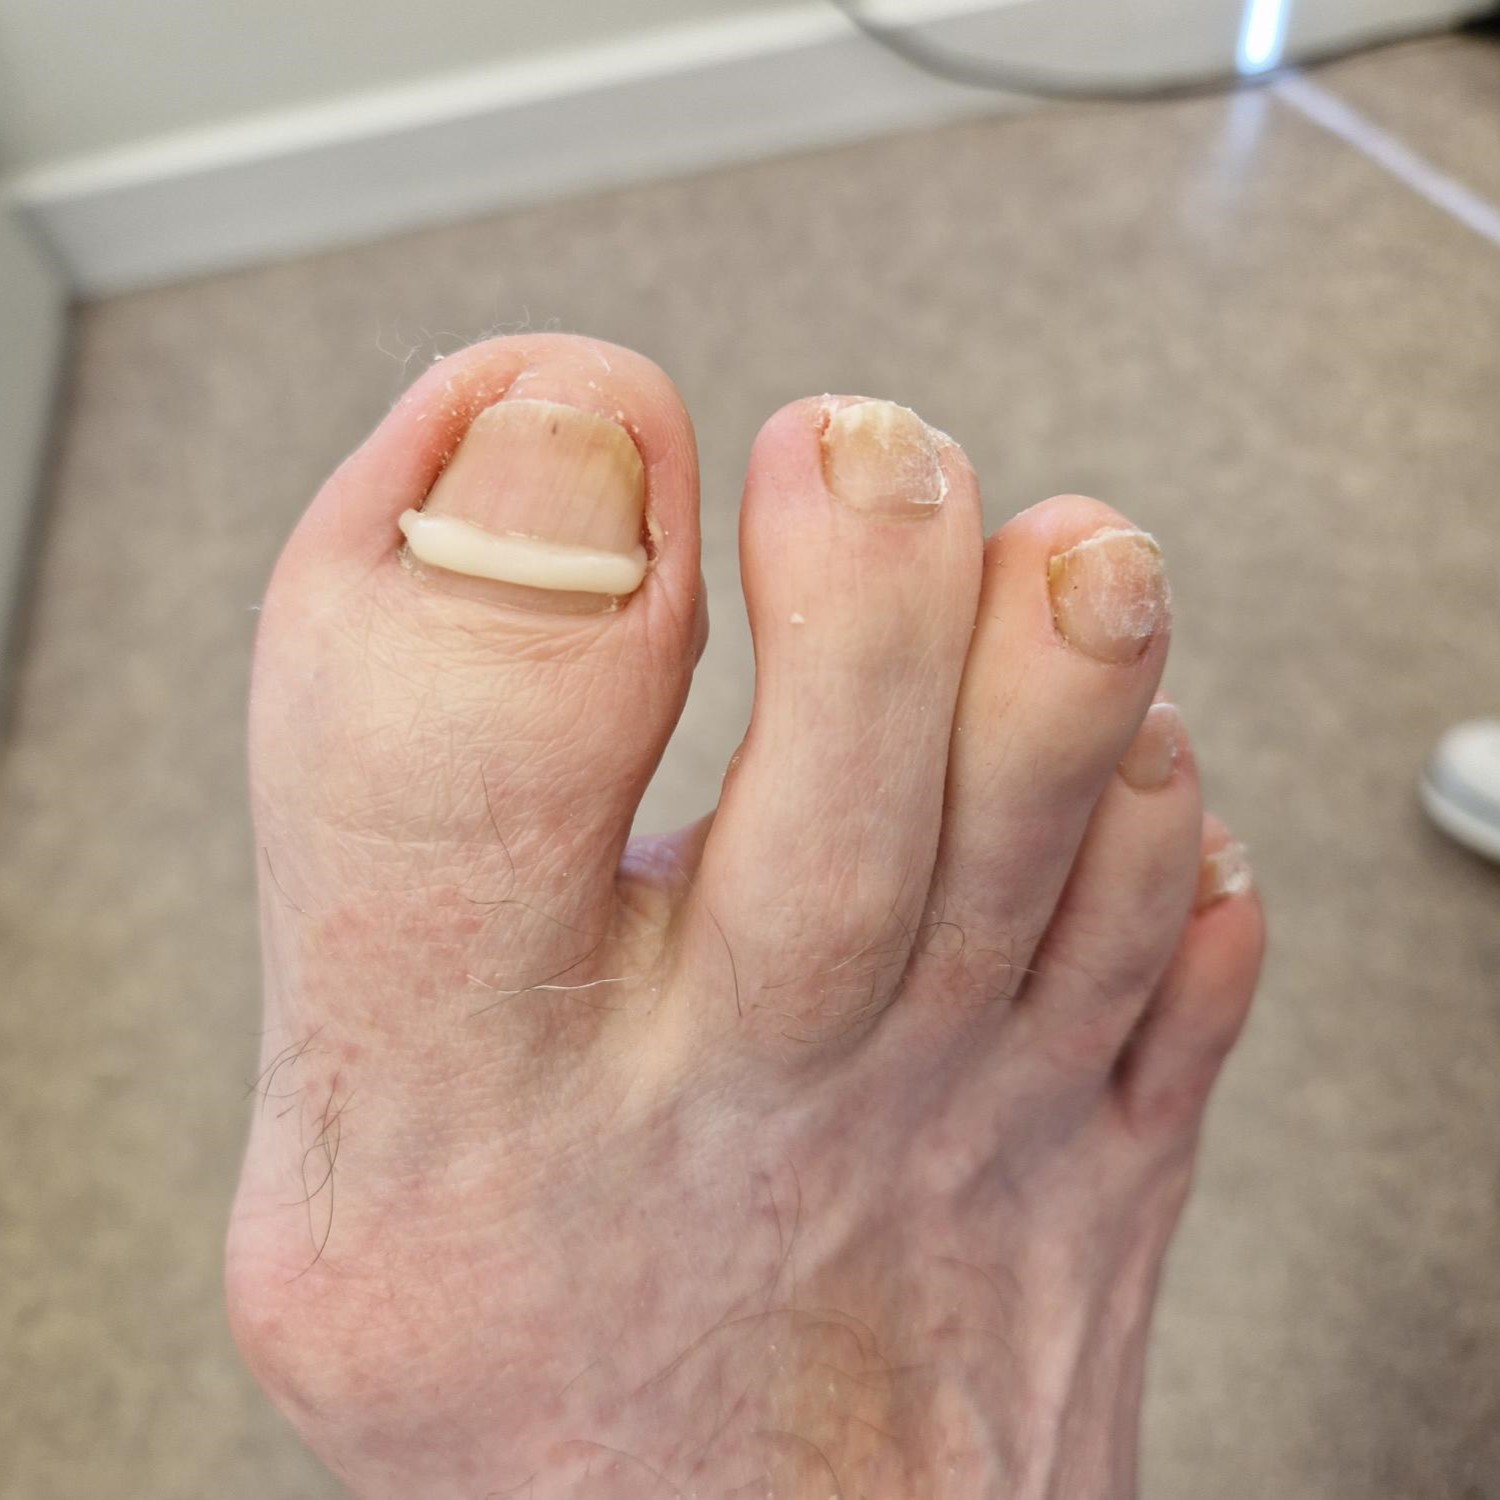 I had an ingrown toenail surgery Wednesday, is this normal? : r/Podiatry